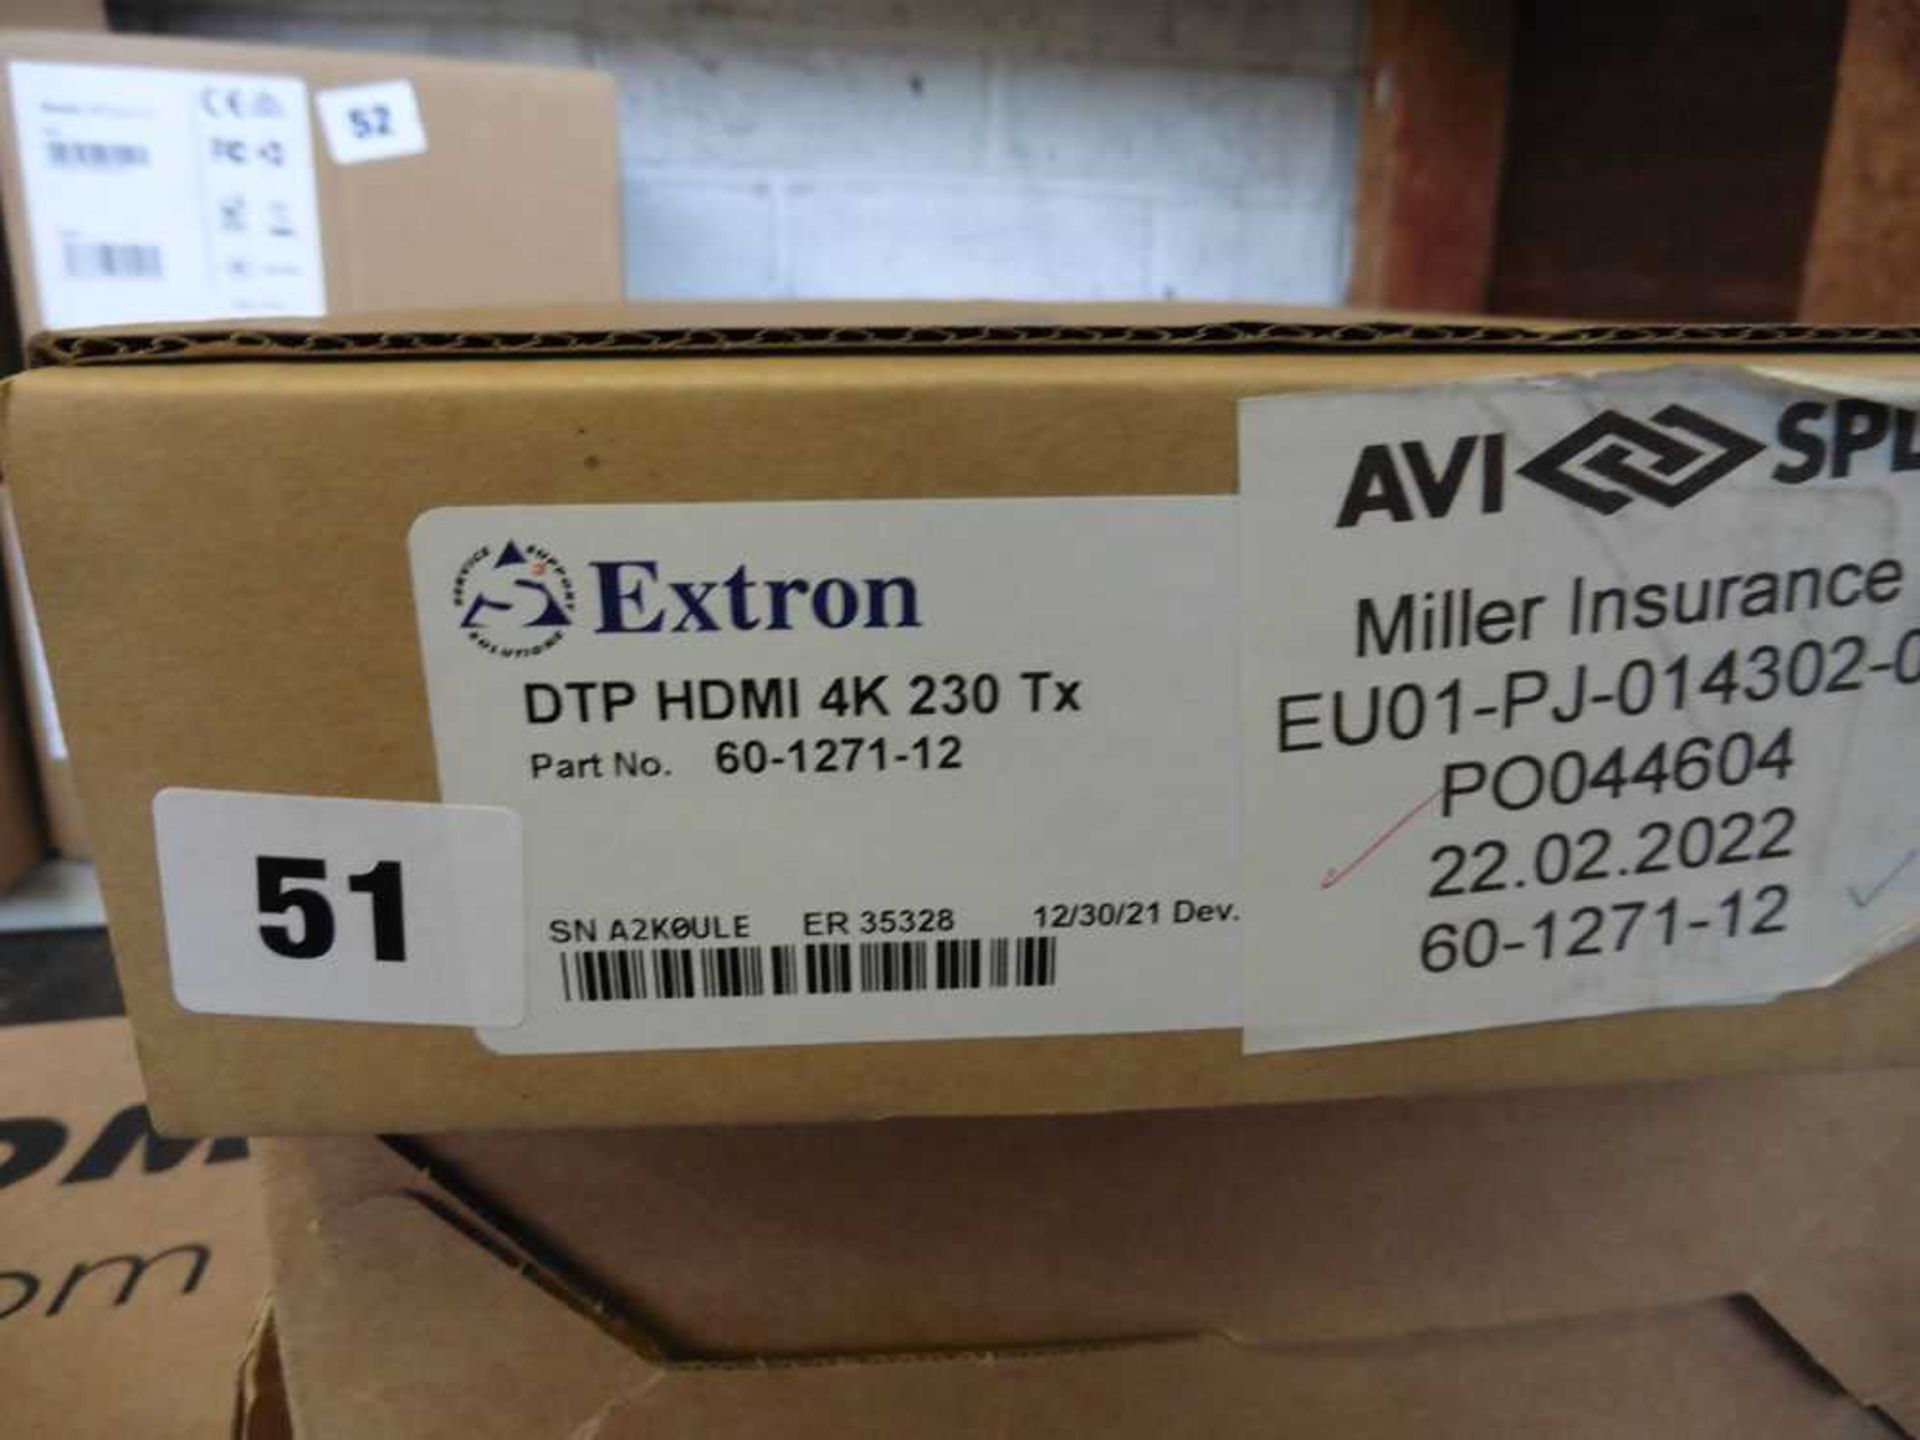 +VAT Extron DTP HDMI 320 TX 4K transmitter with power supply, accessories and box - Image 3 of 3